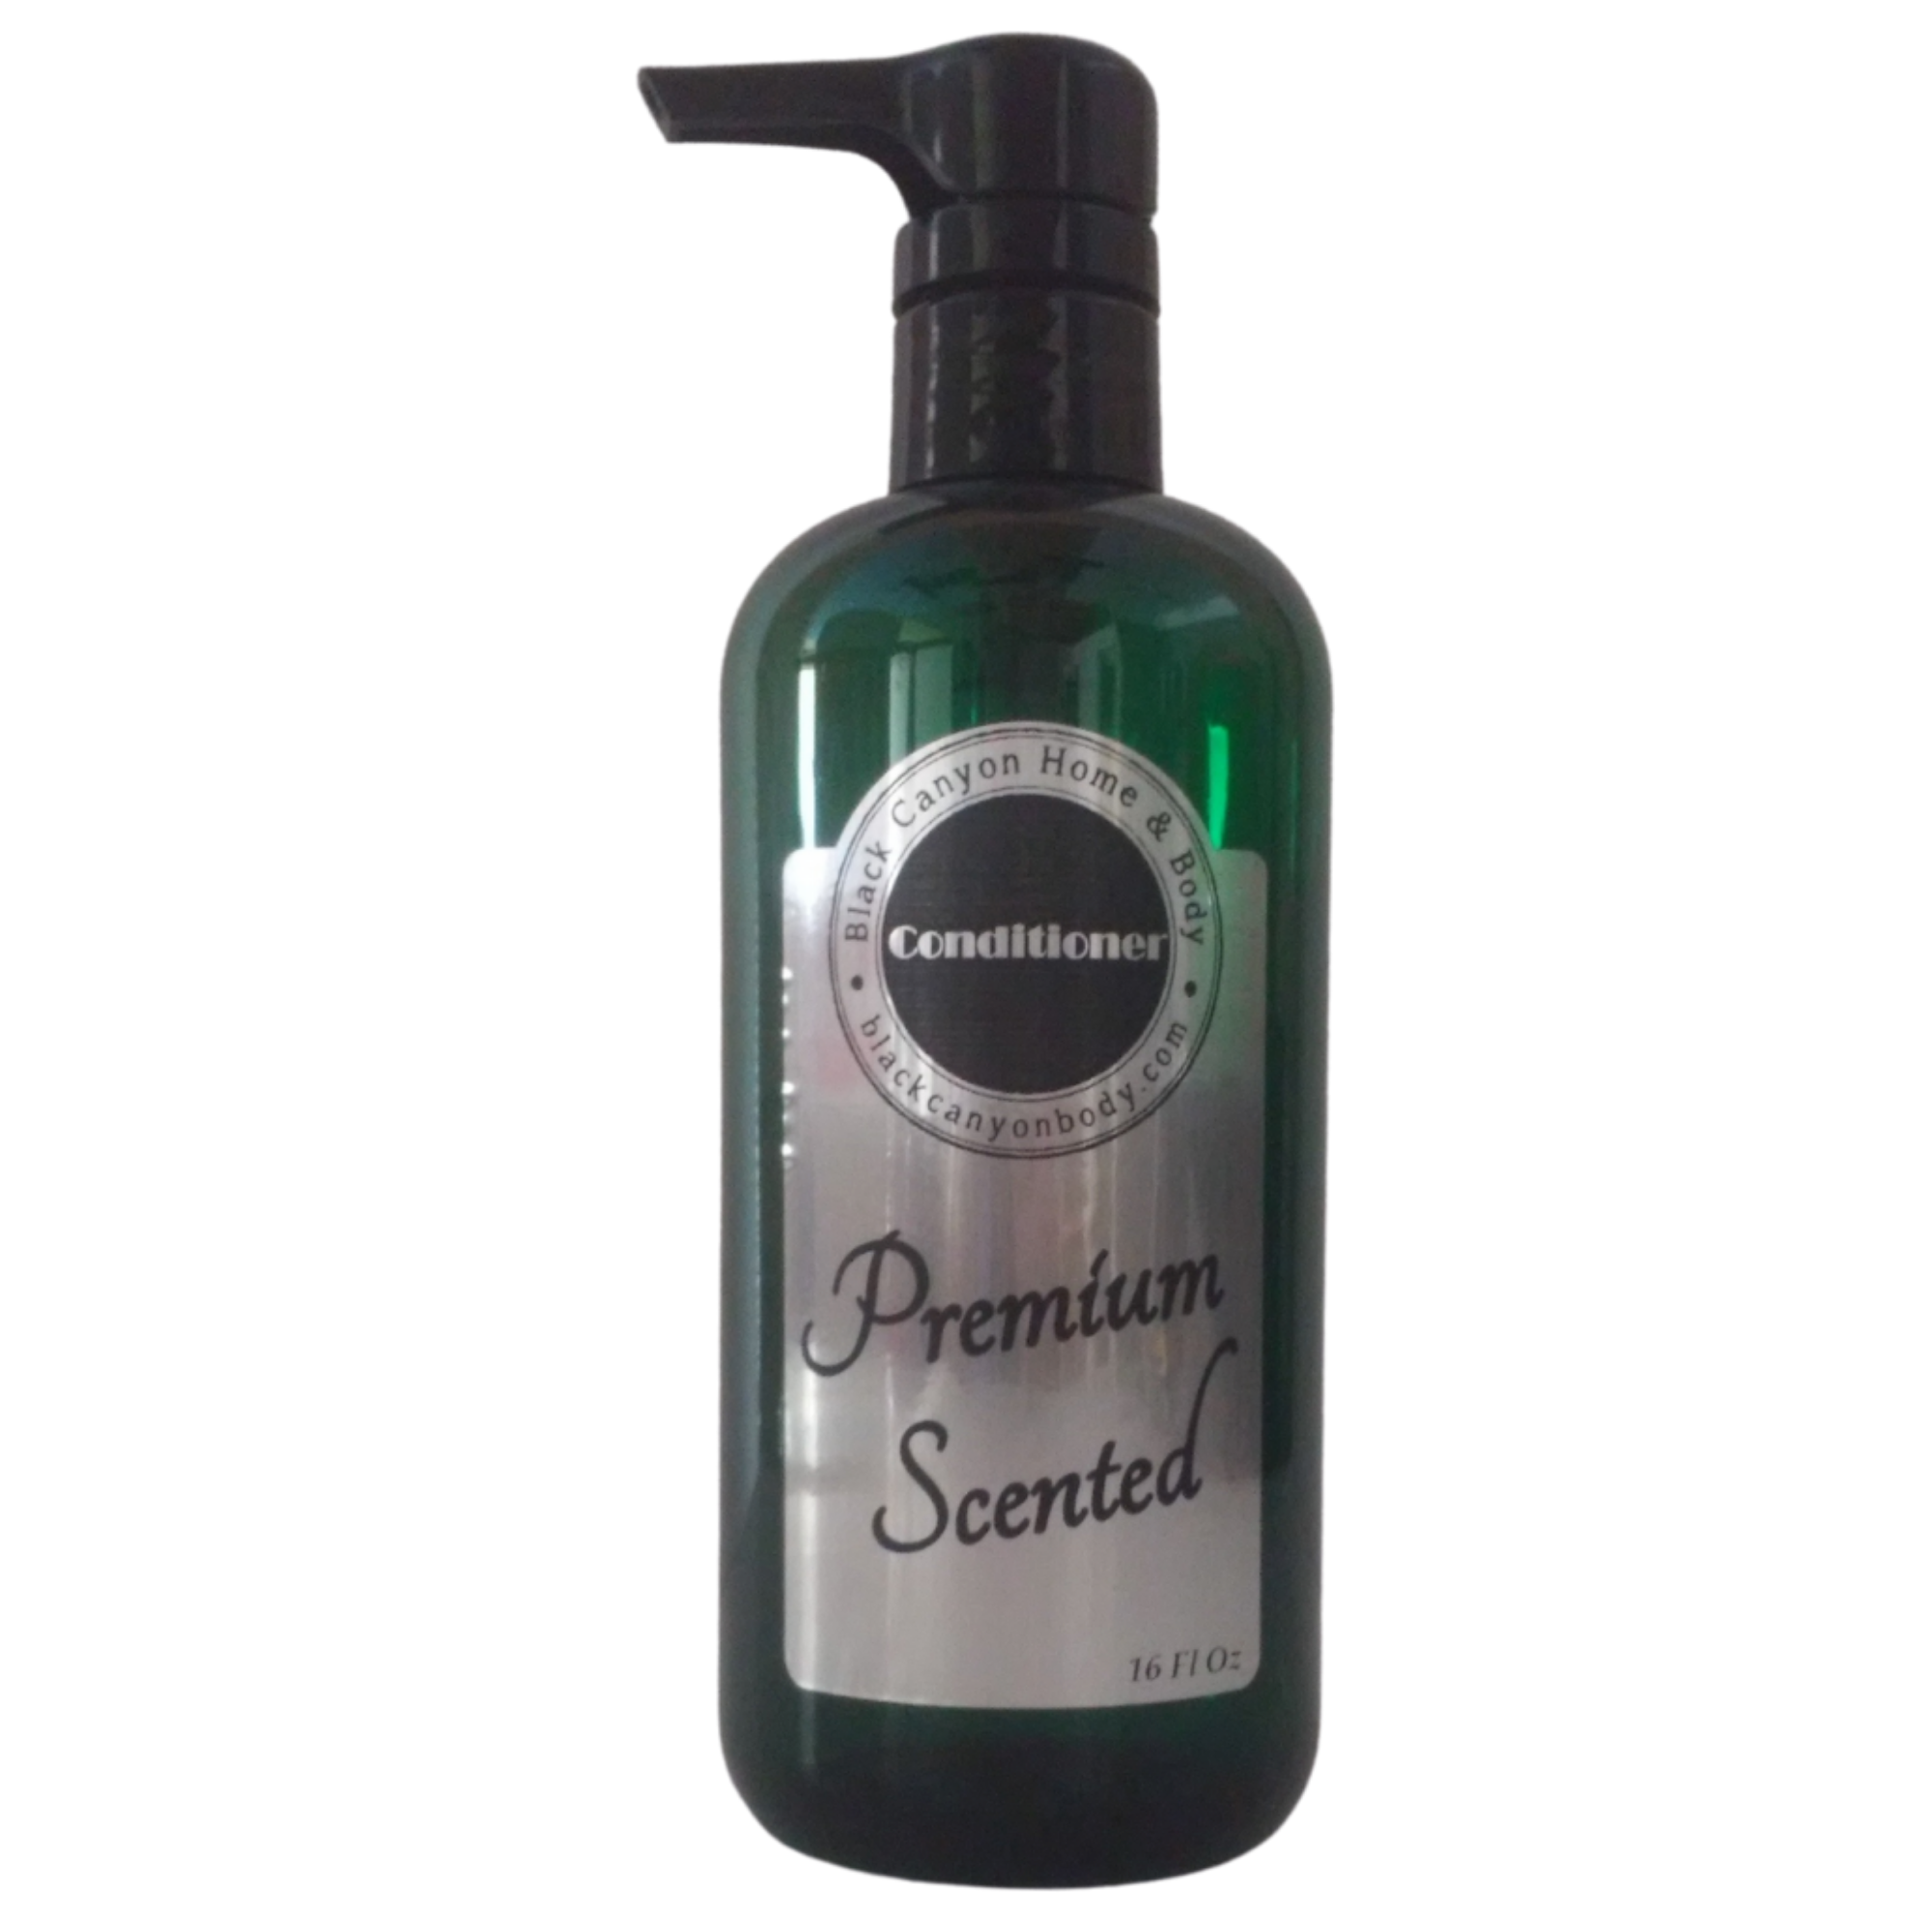 Paydens Cobalt Leather & Birch Scented Conditioner with Argan Oil For Men